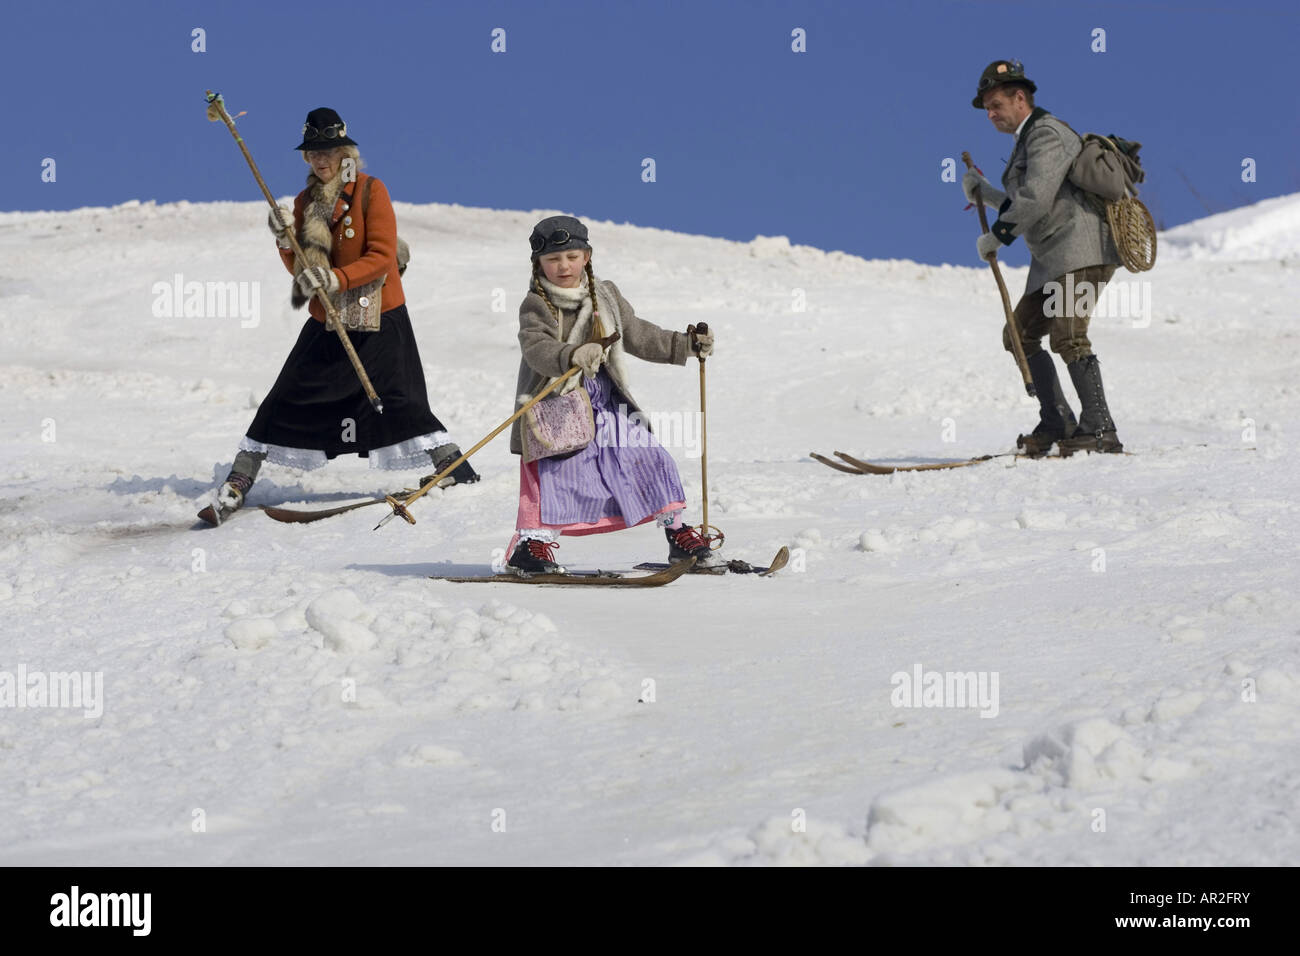 familiy with old-fashioned clothing on a ski trip, Austria Stock Photo